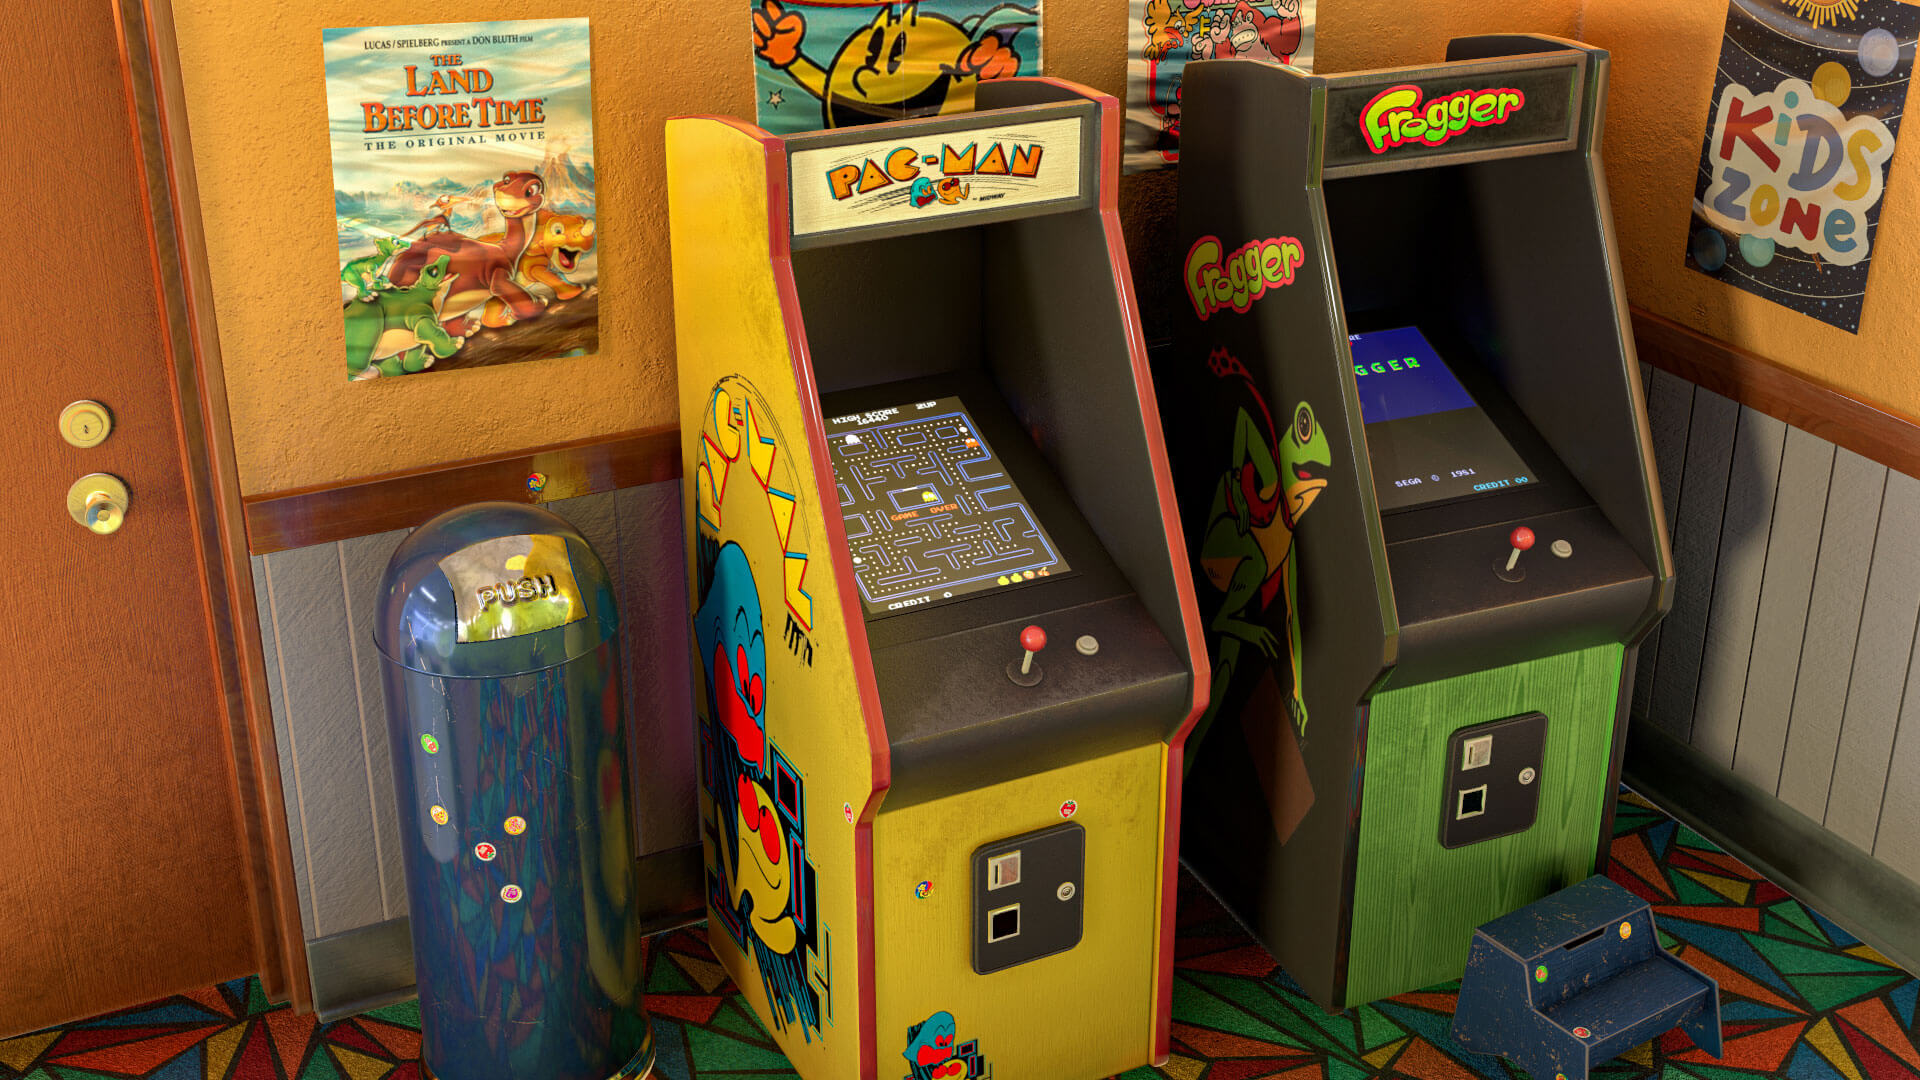 An arcade room containing Pac-Man and Frogger arcade machines.